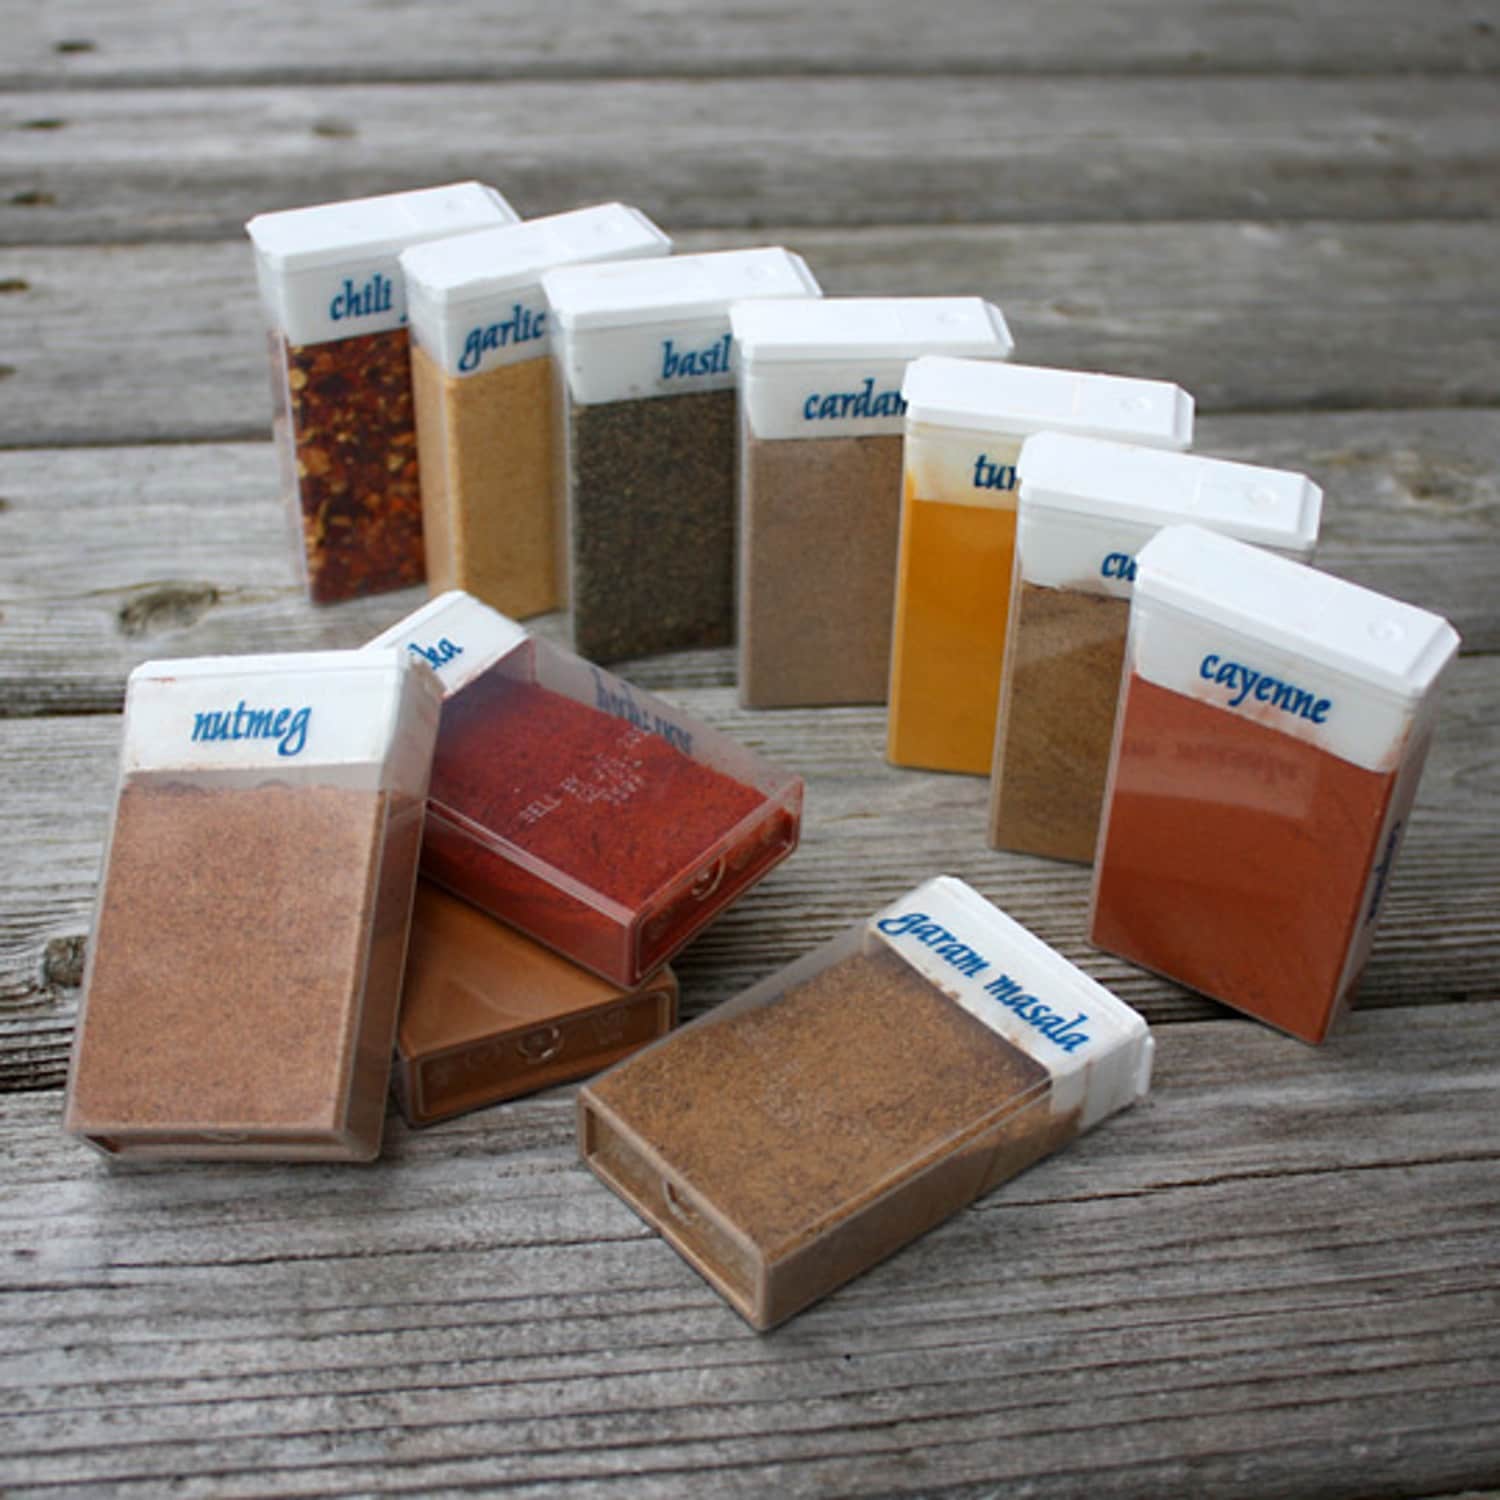 Hack #53: Use empty Tic Tac dispenser to hold spices